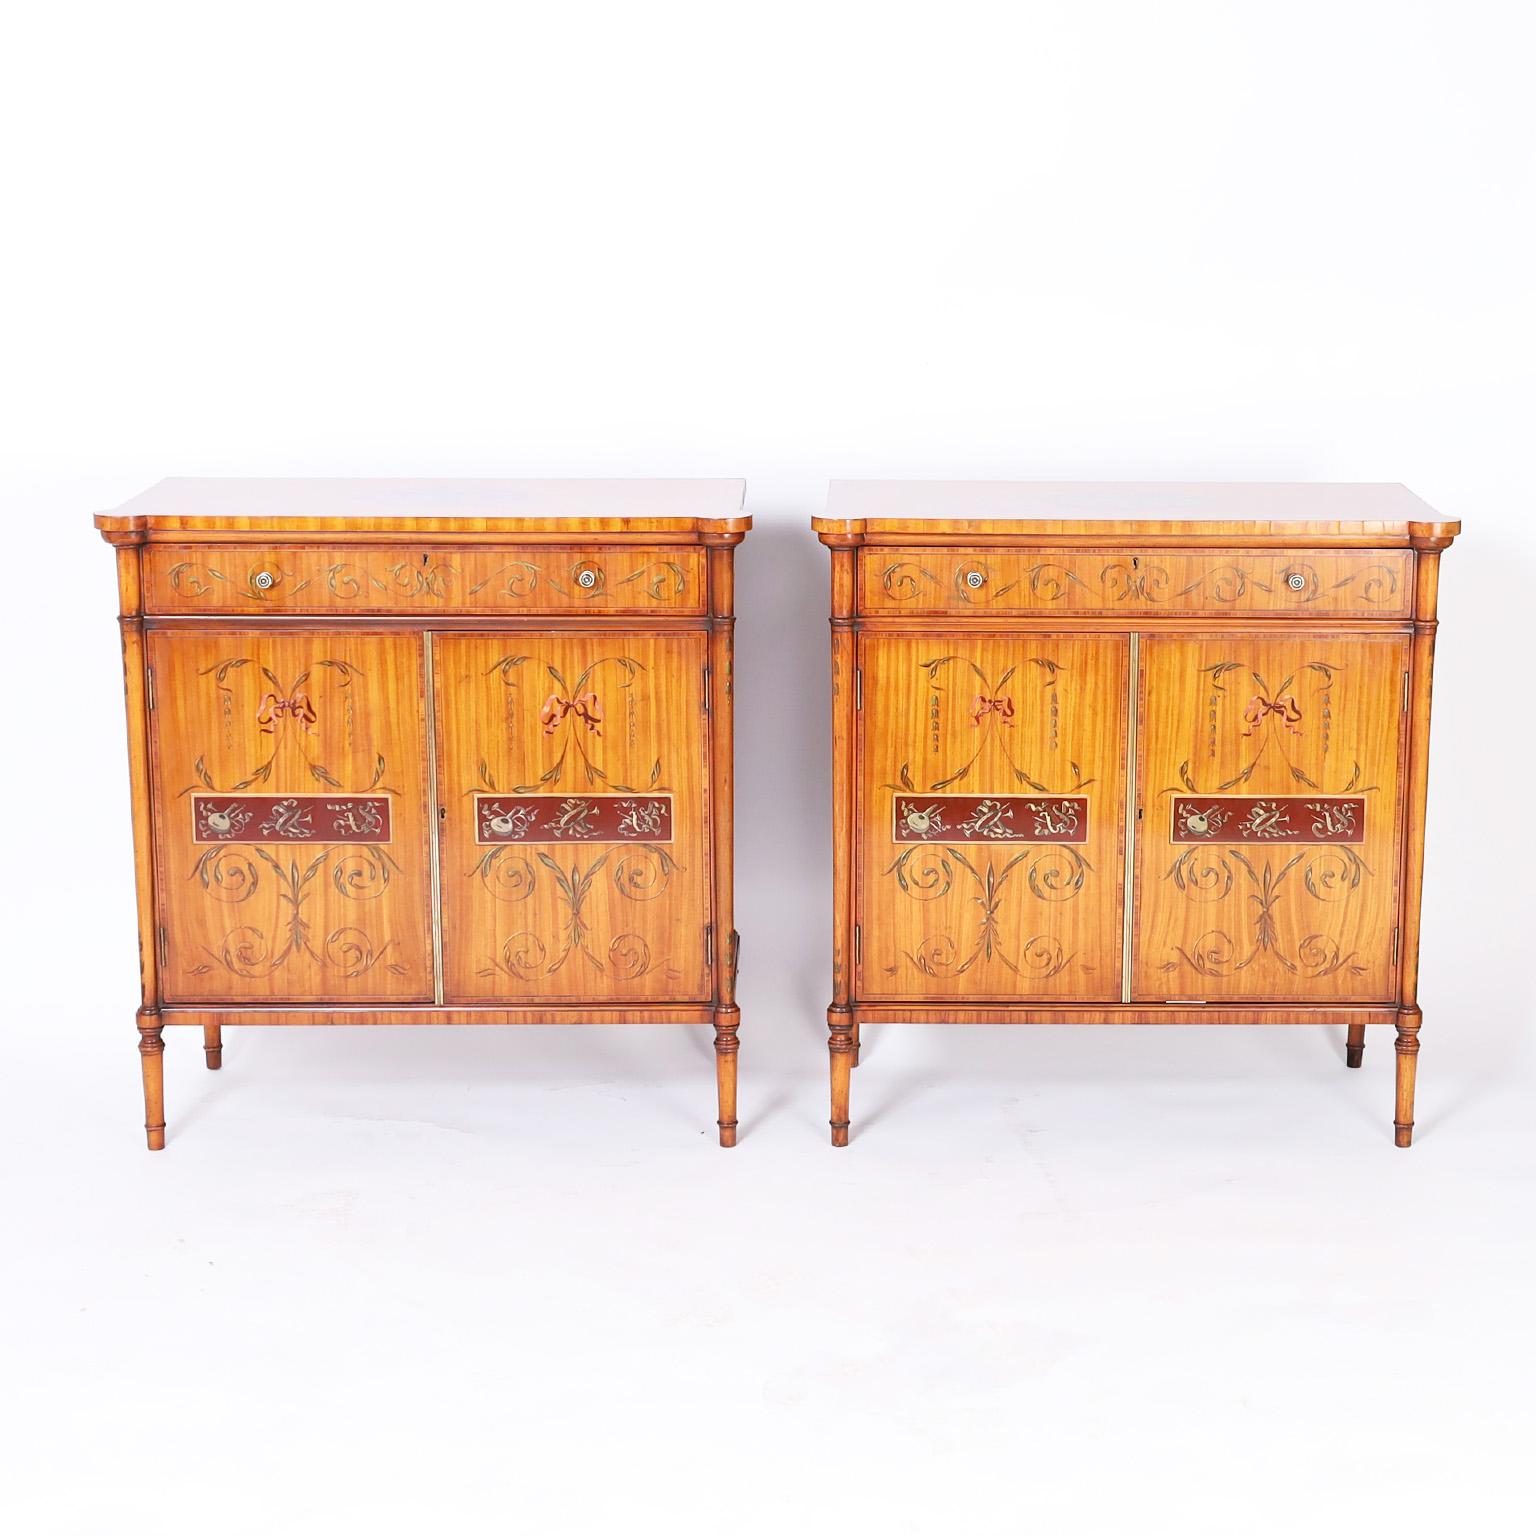 Adams style cabinets crafted in satinwood featuring hand painted musical medallions on the tops, a drawer and two doors decorated with instruments, leaves and ribbons, hand dovetailed construction and elegant turned legs.